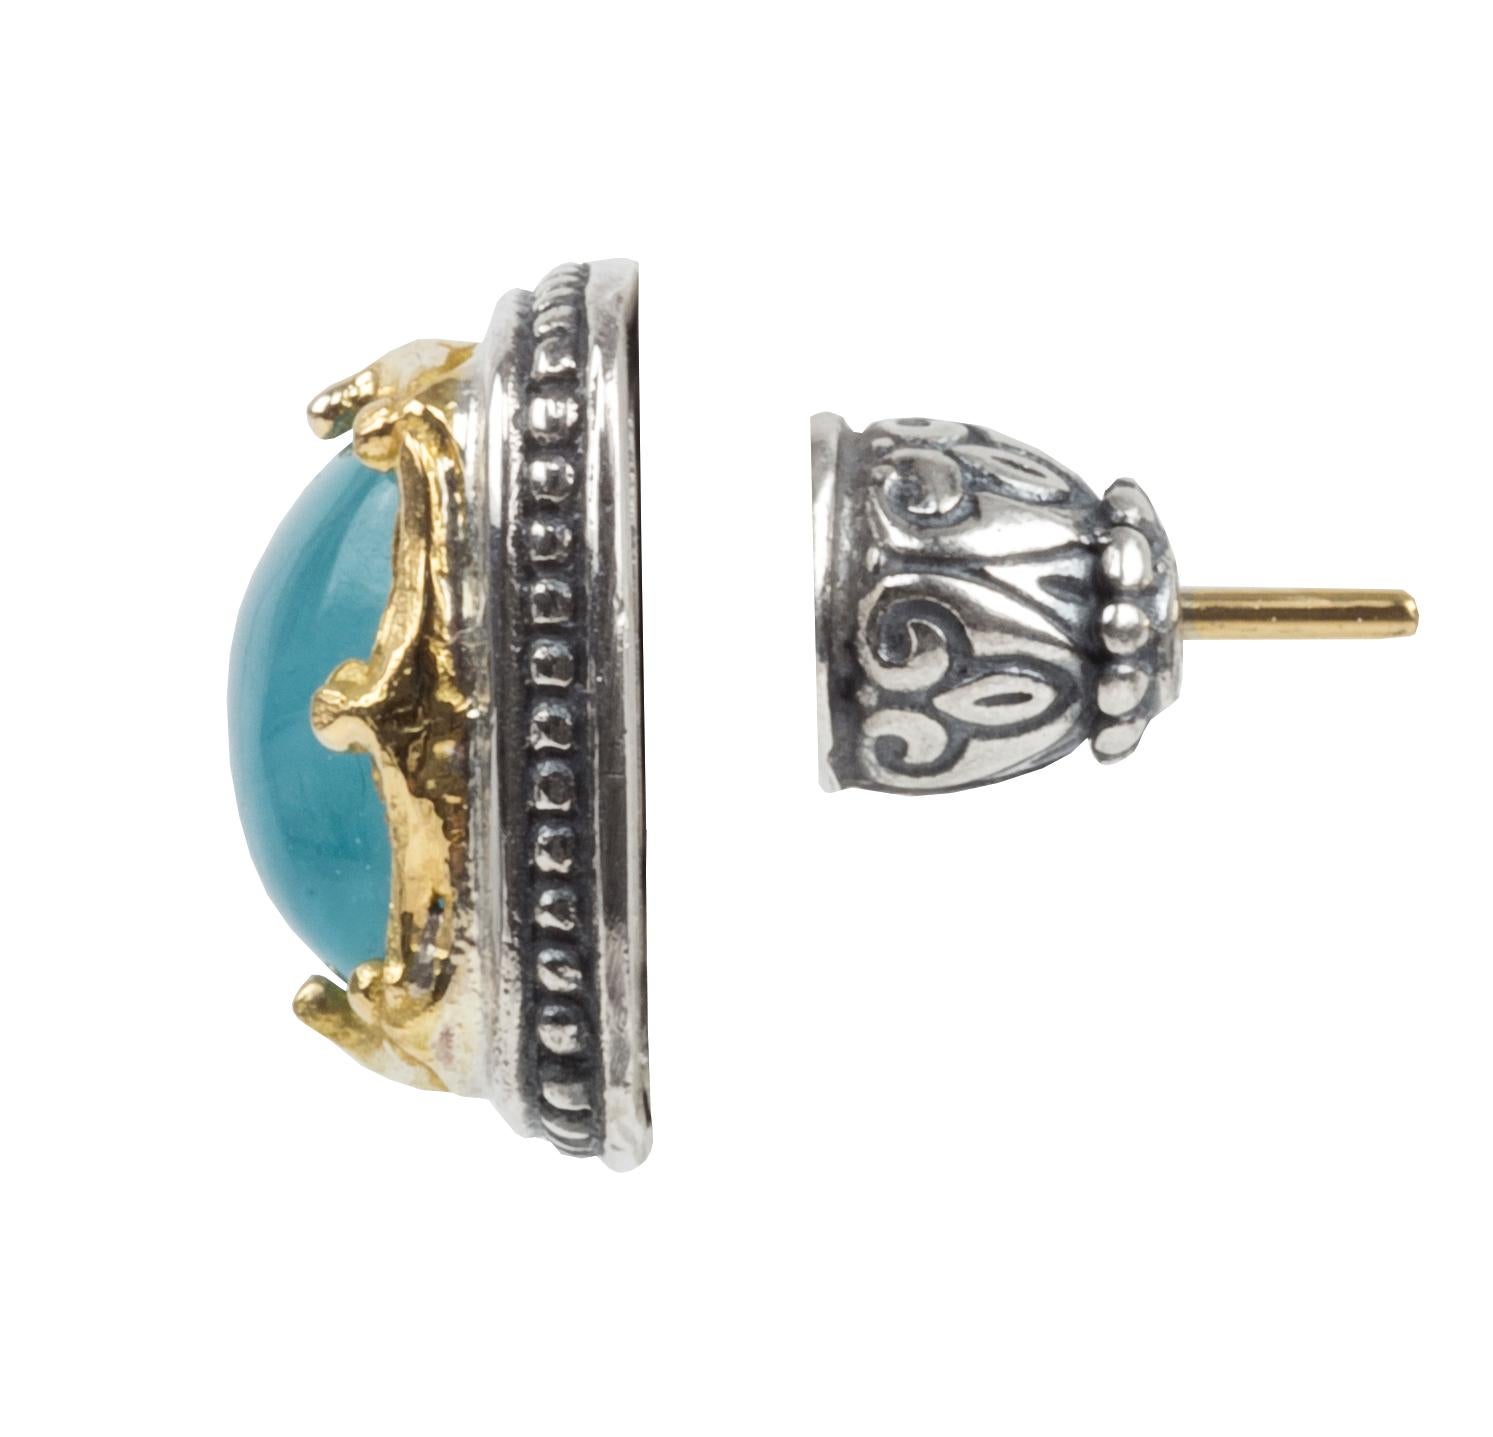 Konstantino Sterling Silver and Yellow Gold Astria Stud Earrings with Cabochon Aquamarine.  Stamped K 925 and 750.